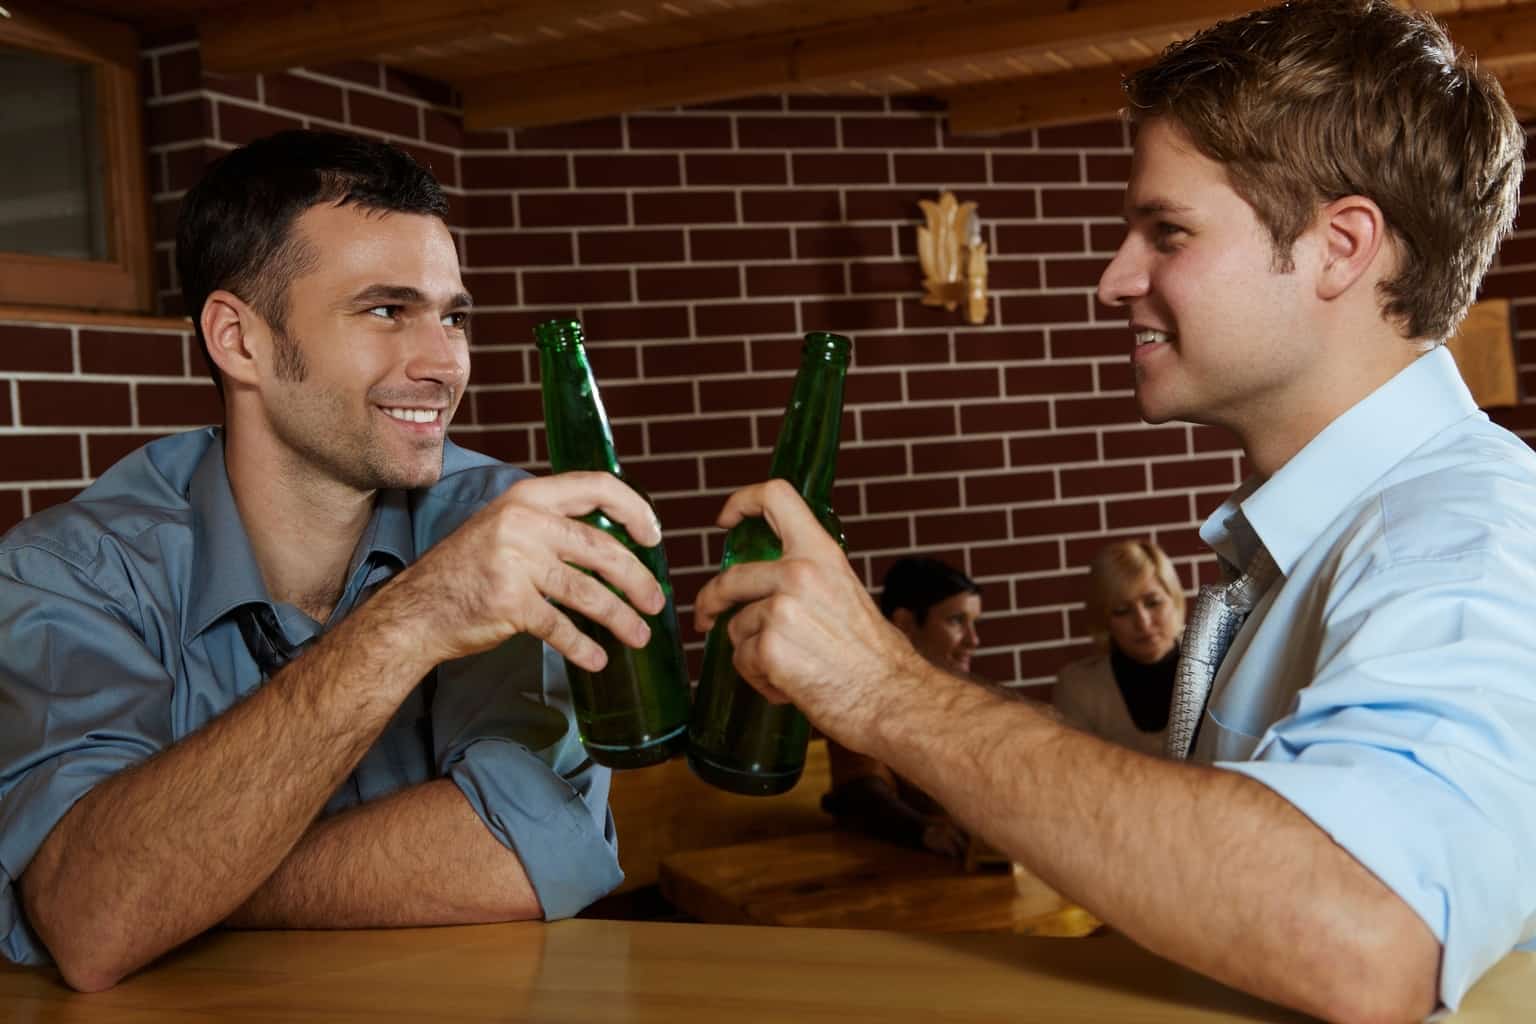 Alcohol lowers testosterone, even one or two drinks a day